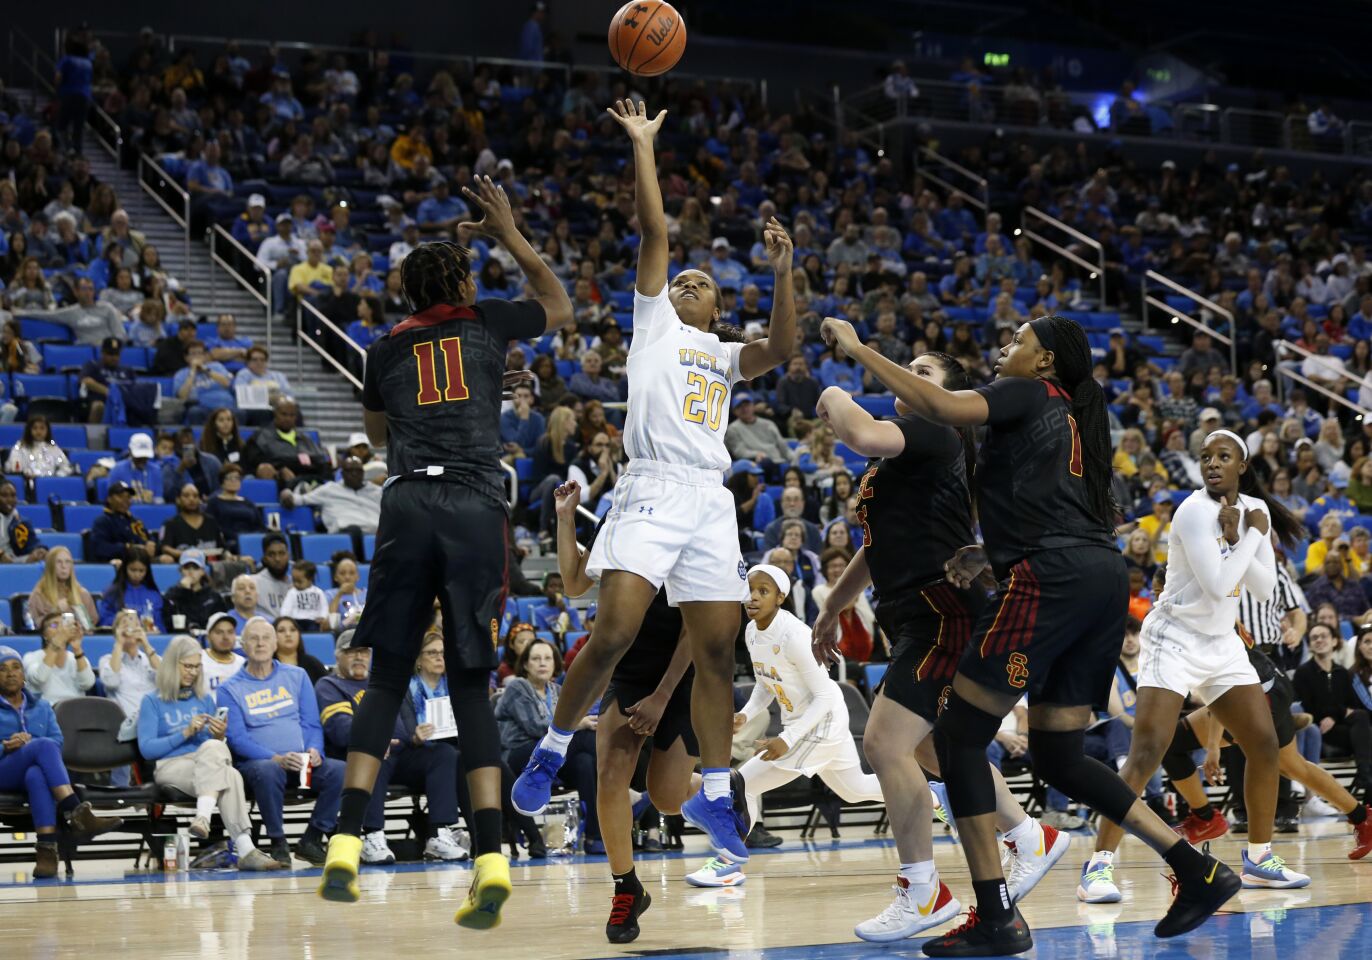 UCLA guard Charisma Osborne scores while being guarded by USC guard Aliyah Jeune (11) and center Angel Jackson (15) during the second half.